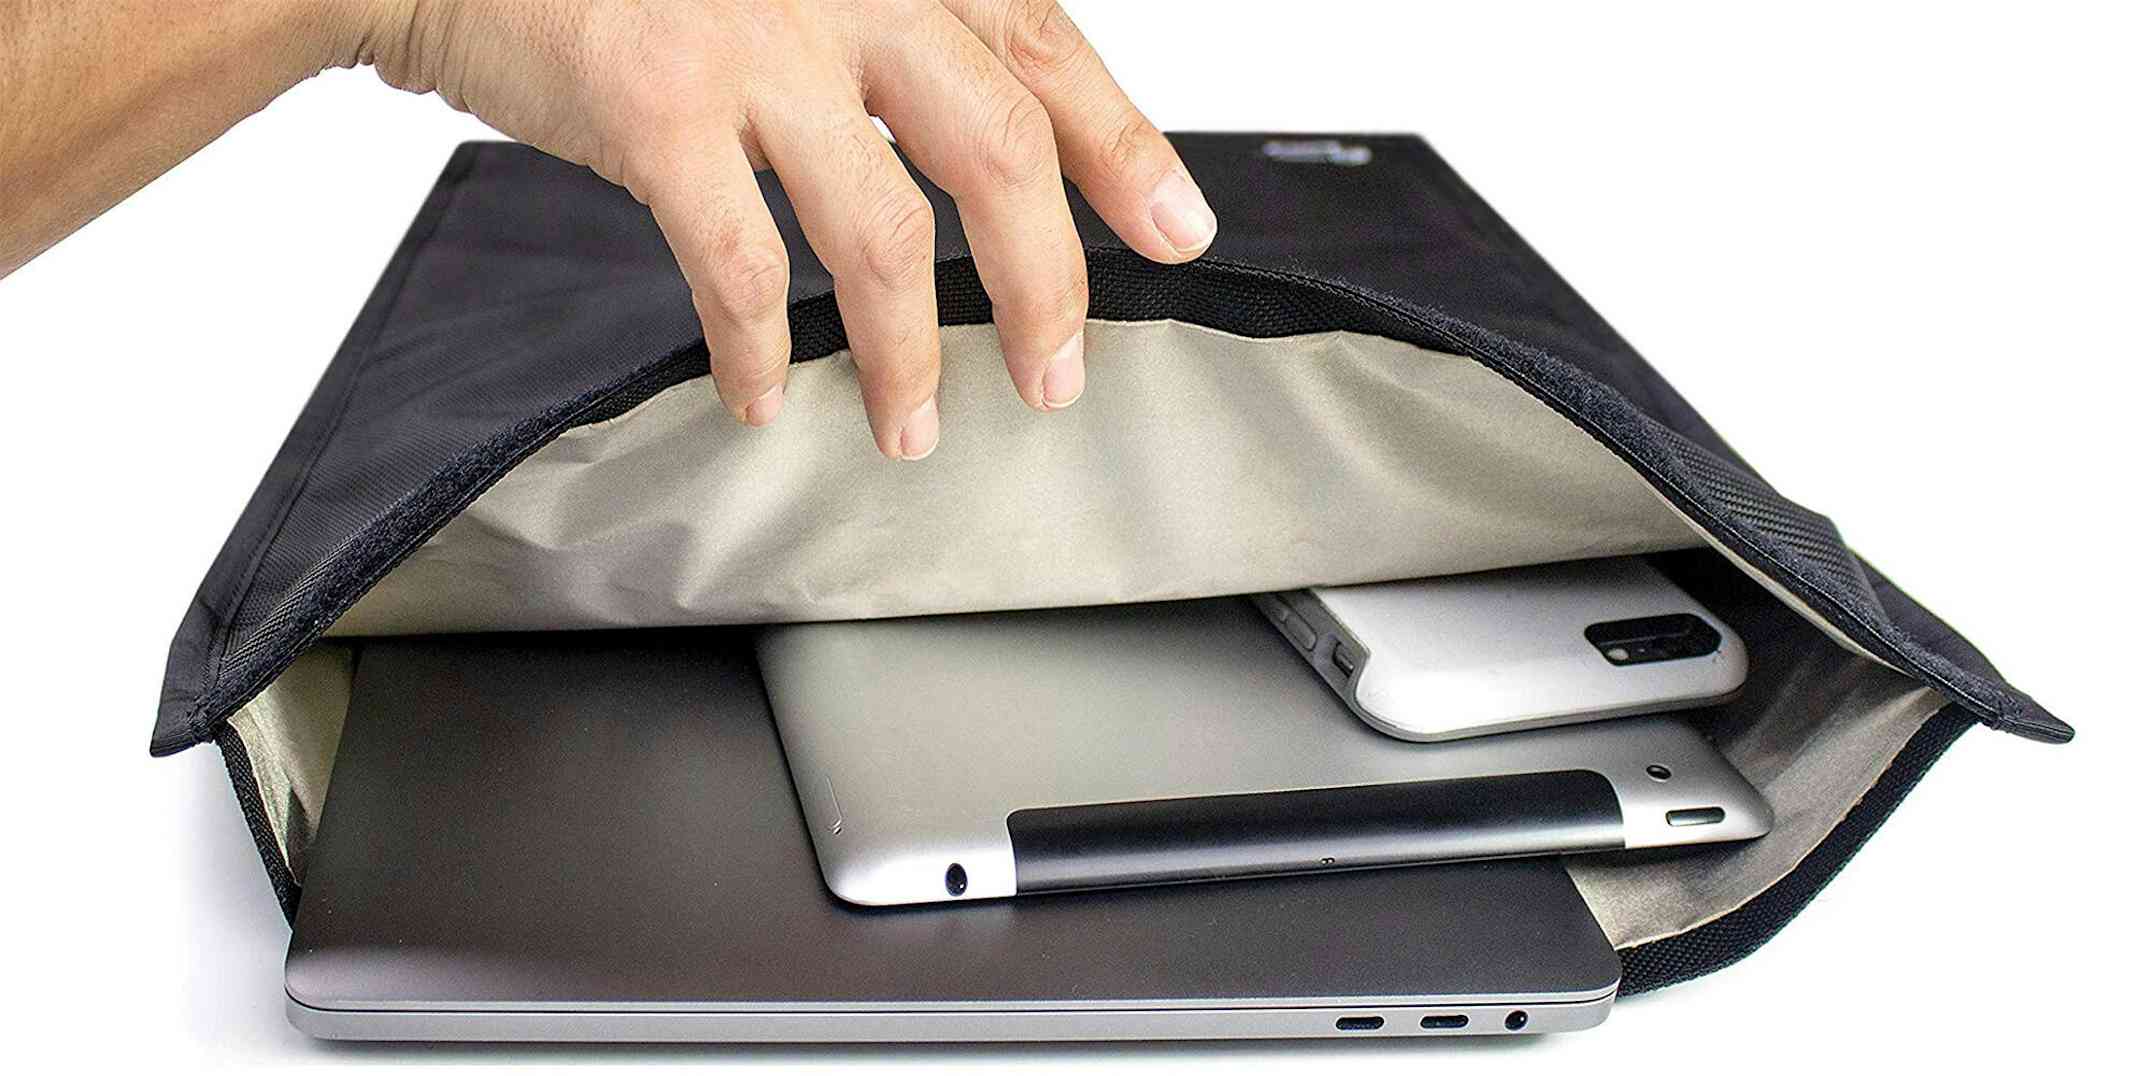 Pickpocket-Proof and RFID-Blocking Gear to Keep Your Stuff Safe on a Cruise